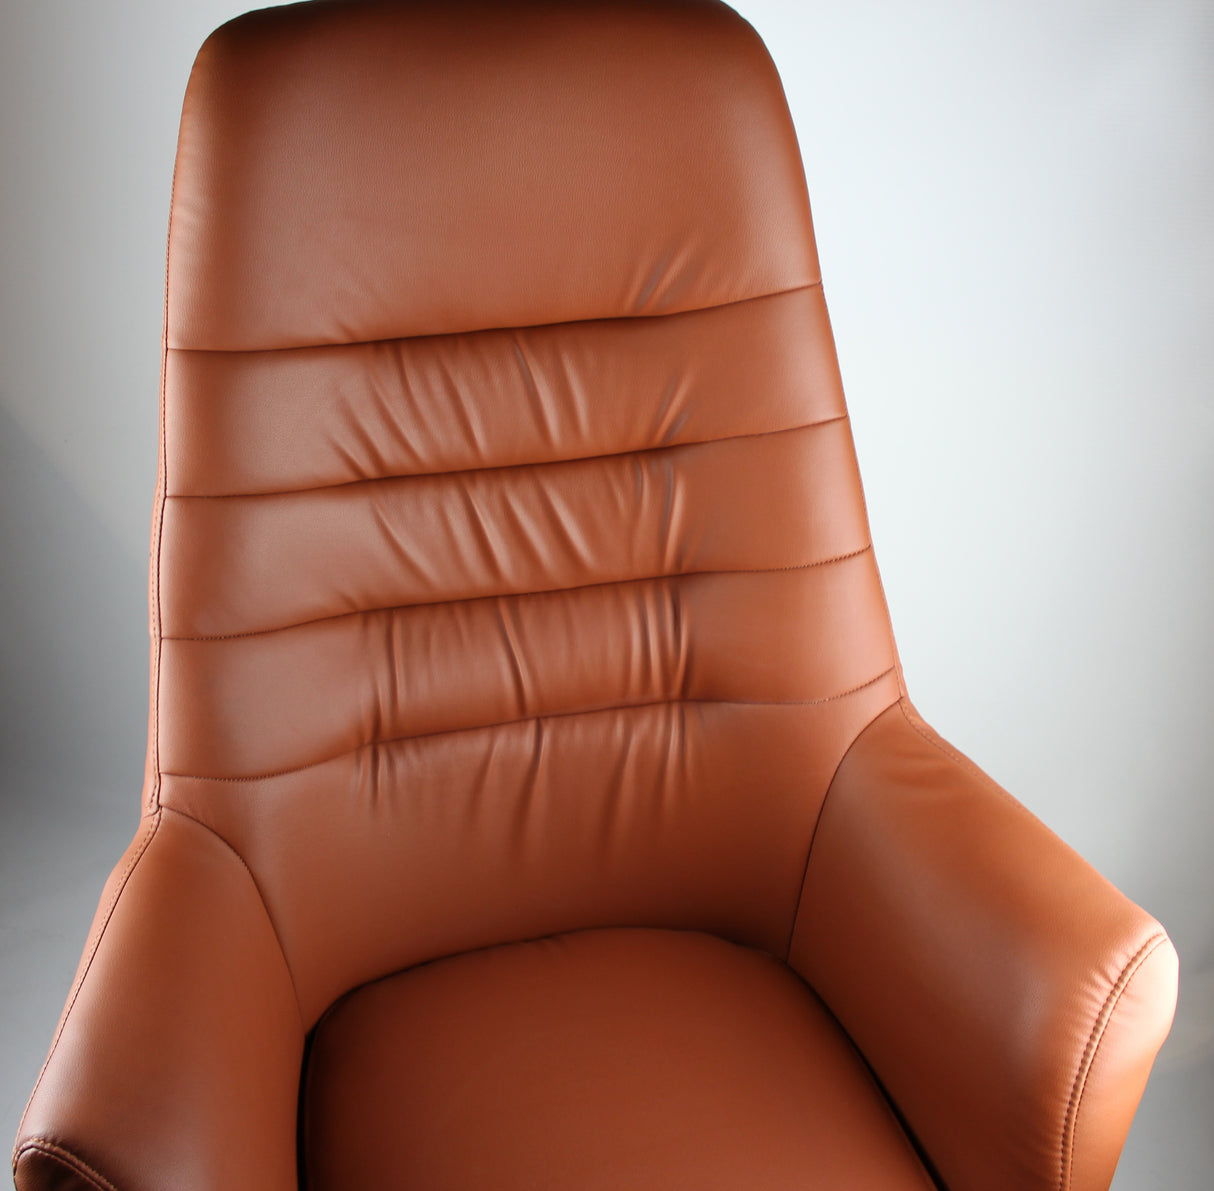 Office Chair In Tan With Swivel GRA-CHA-506A